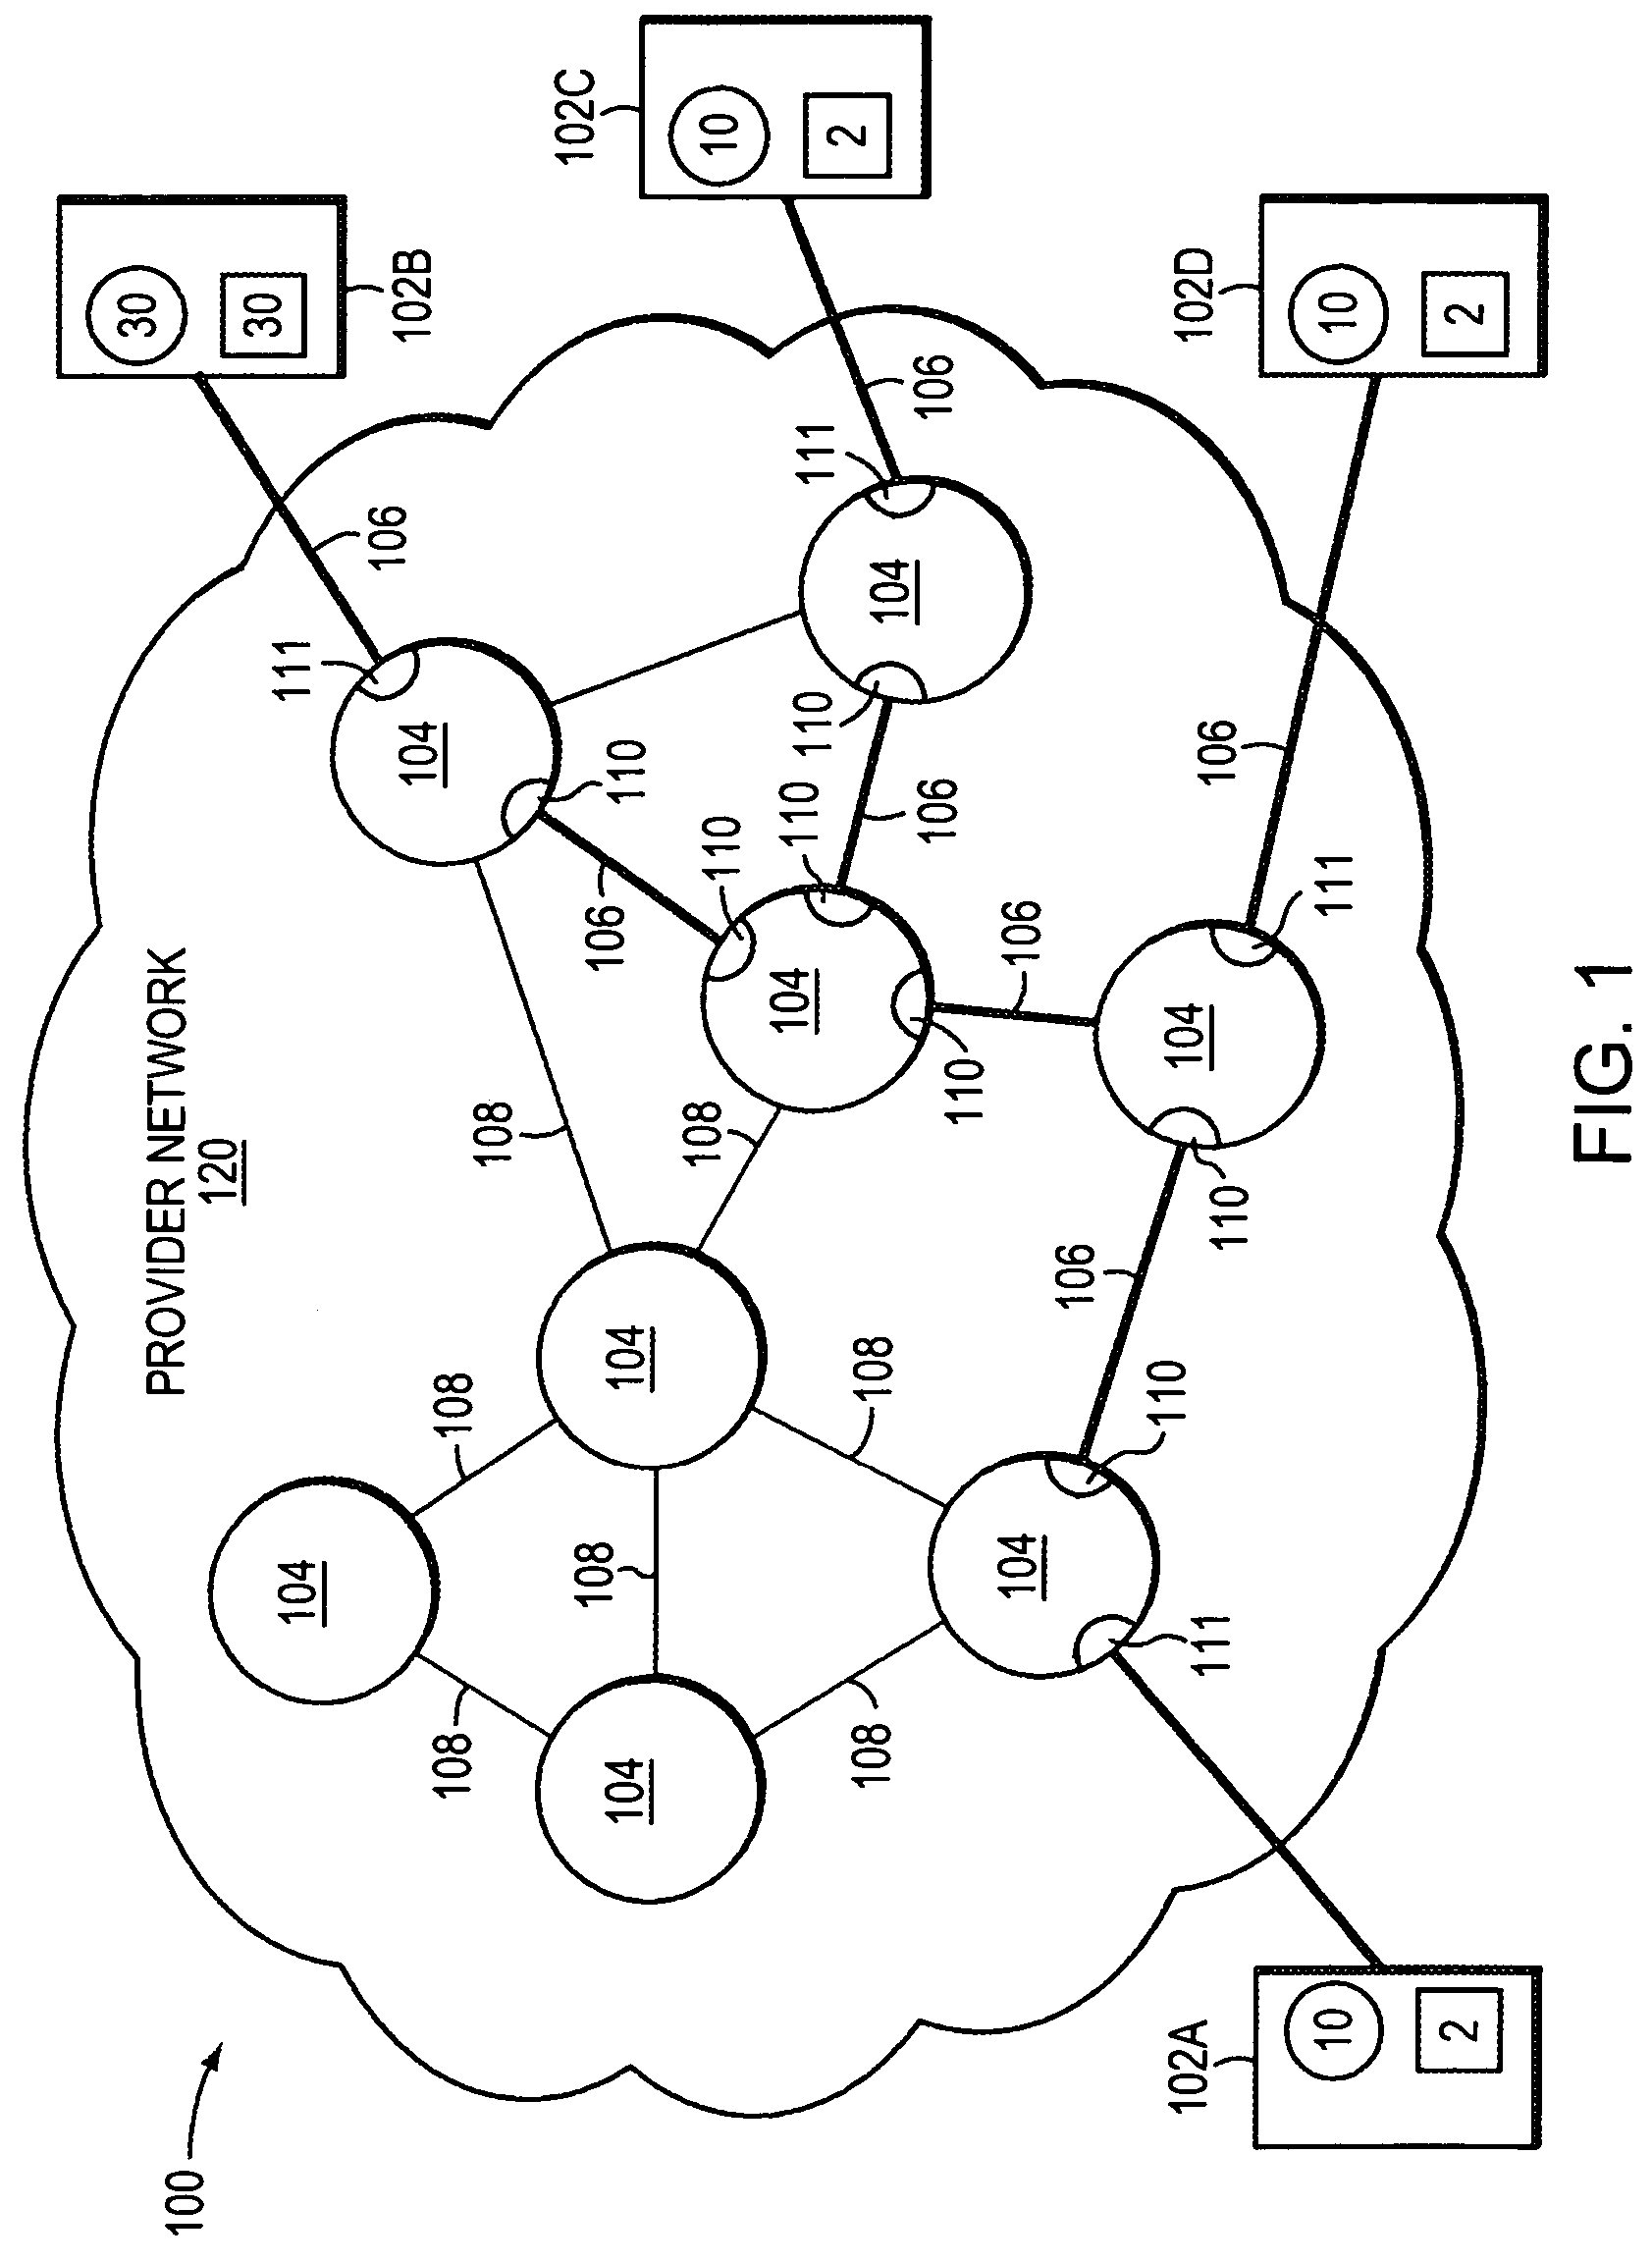 Technique for efficiently managing bandwidth for multipoint-to-multipoint services in a provider network